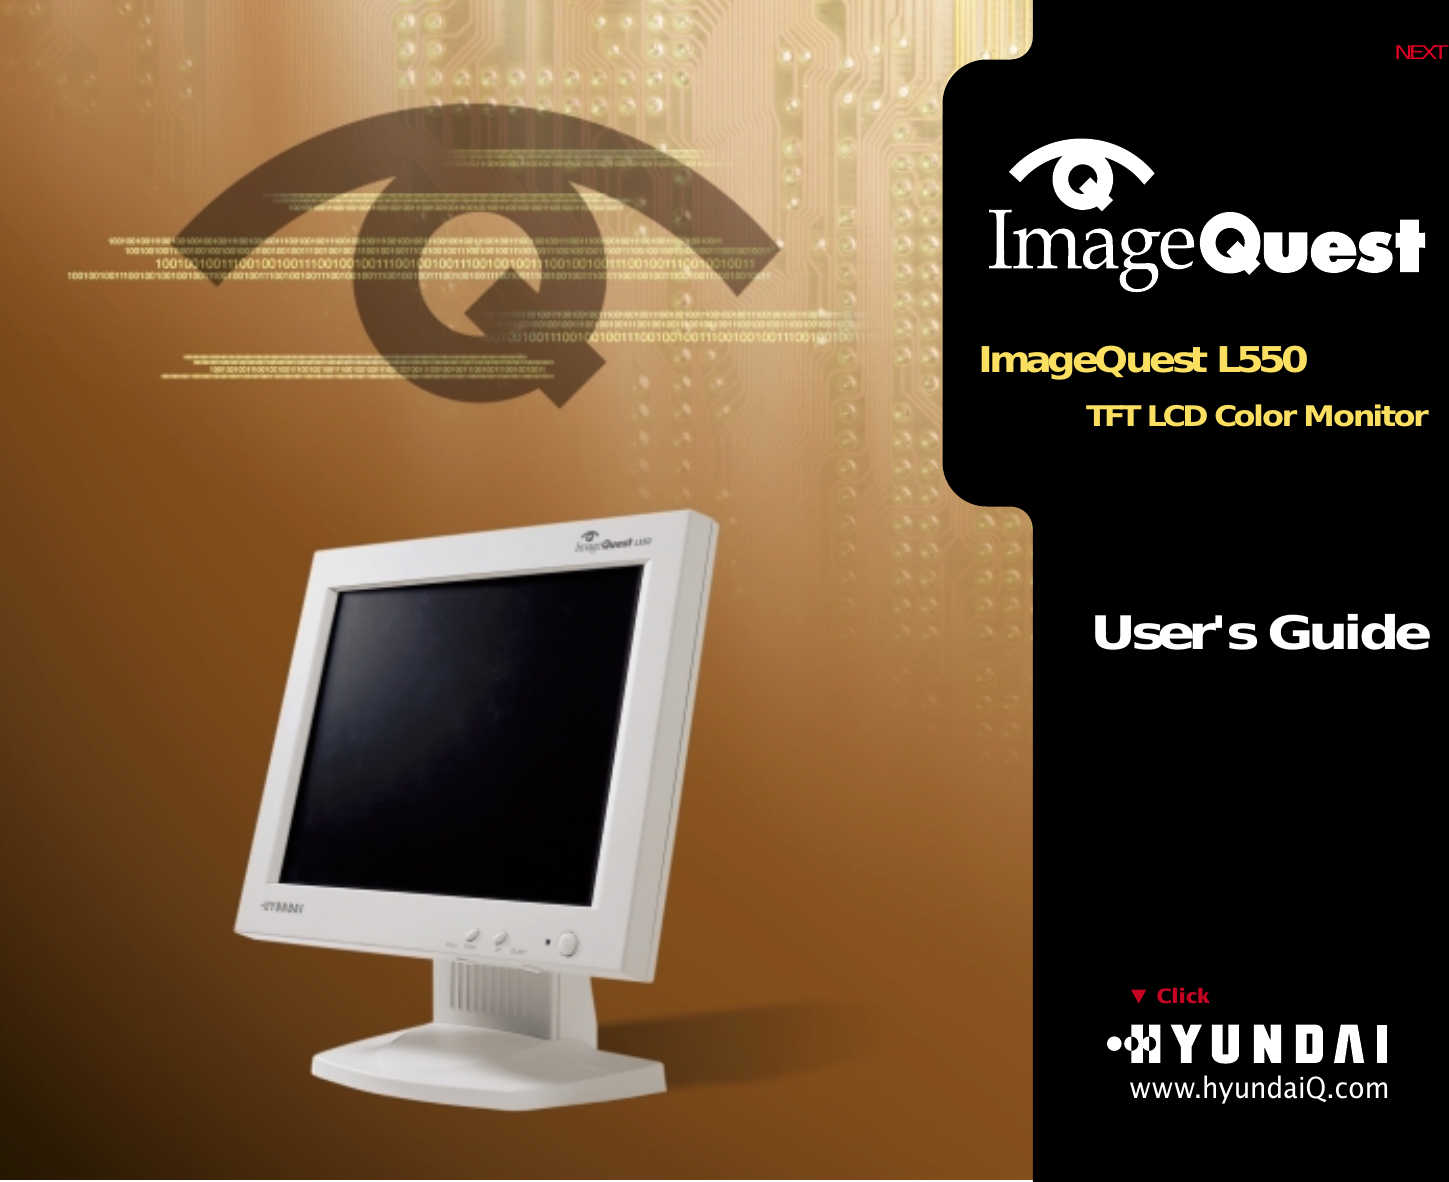 ImageQuest L550TFT LCD Color MonitorUser&apos;s GuideClickwww.hyundaiQ.comNEXT